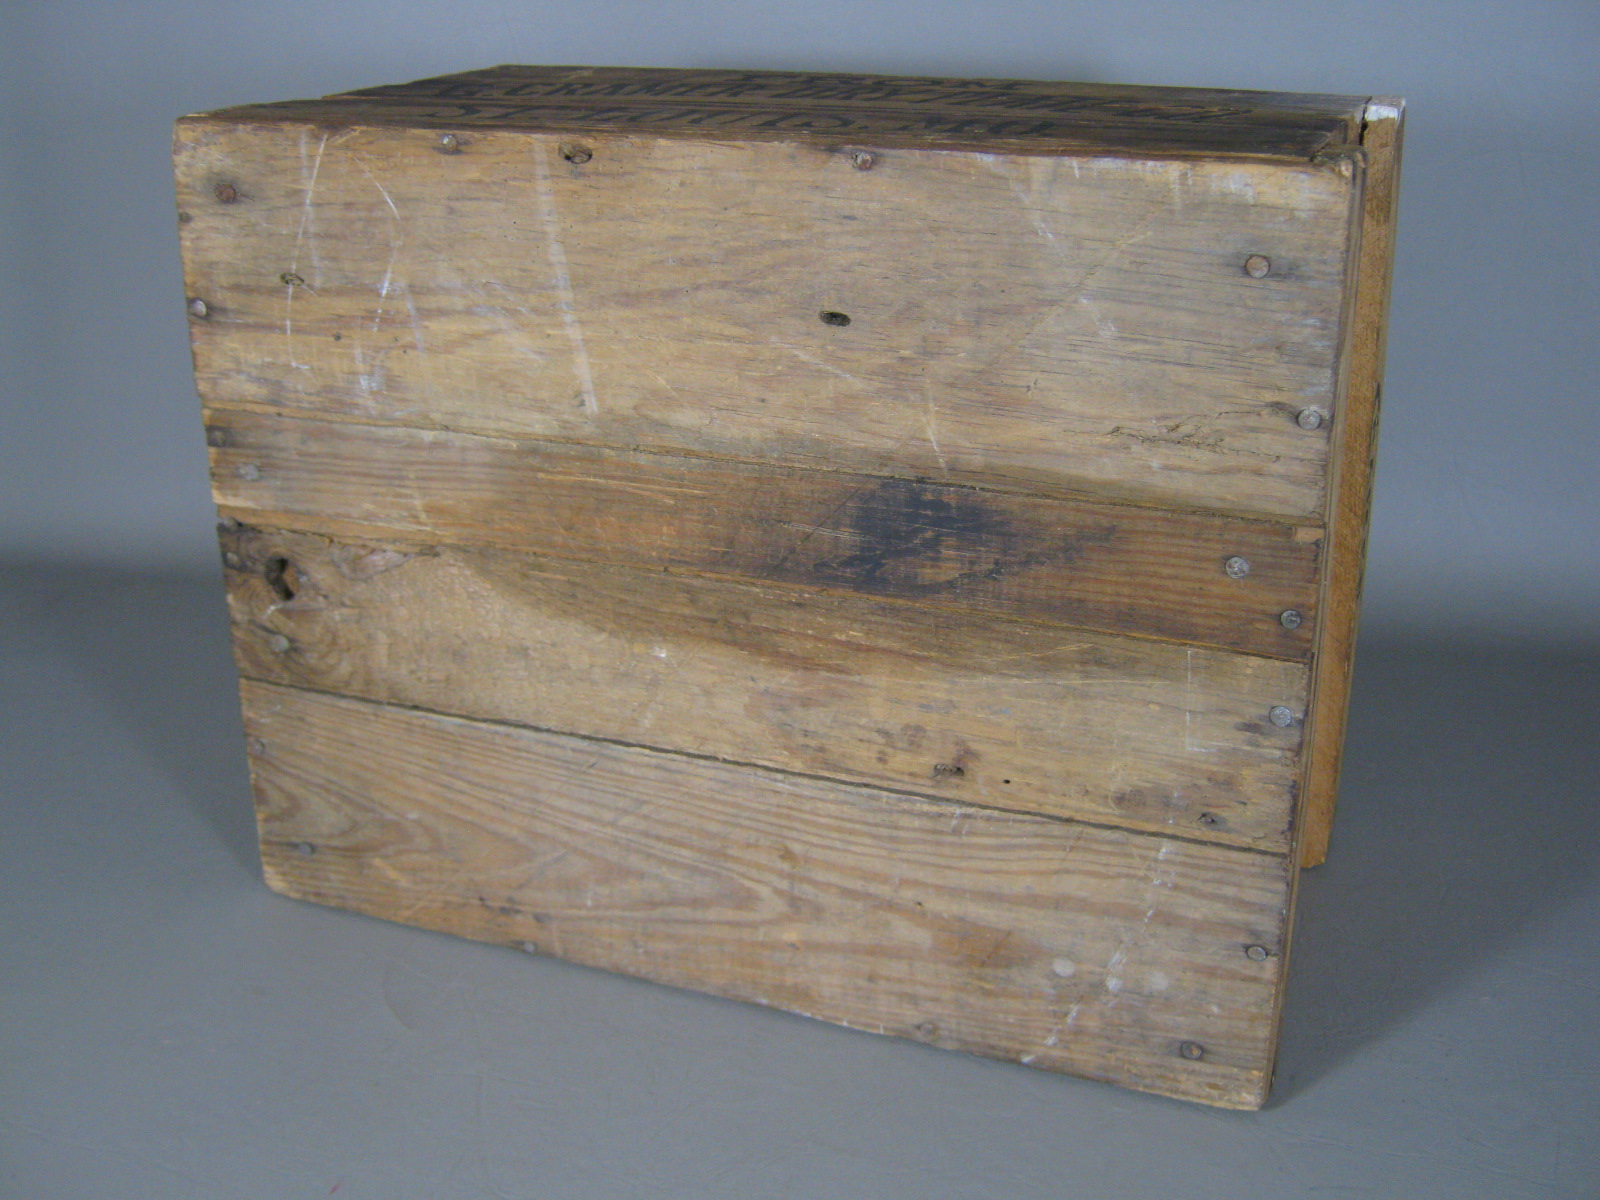 Antique 1800s Cramer Dry Plate Photo Negatives Wood Wooden Crate Box St. Louis 6